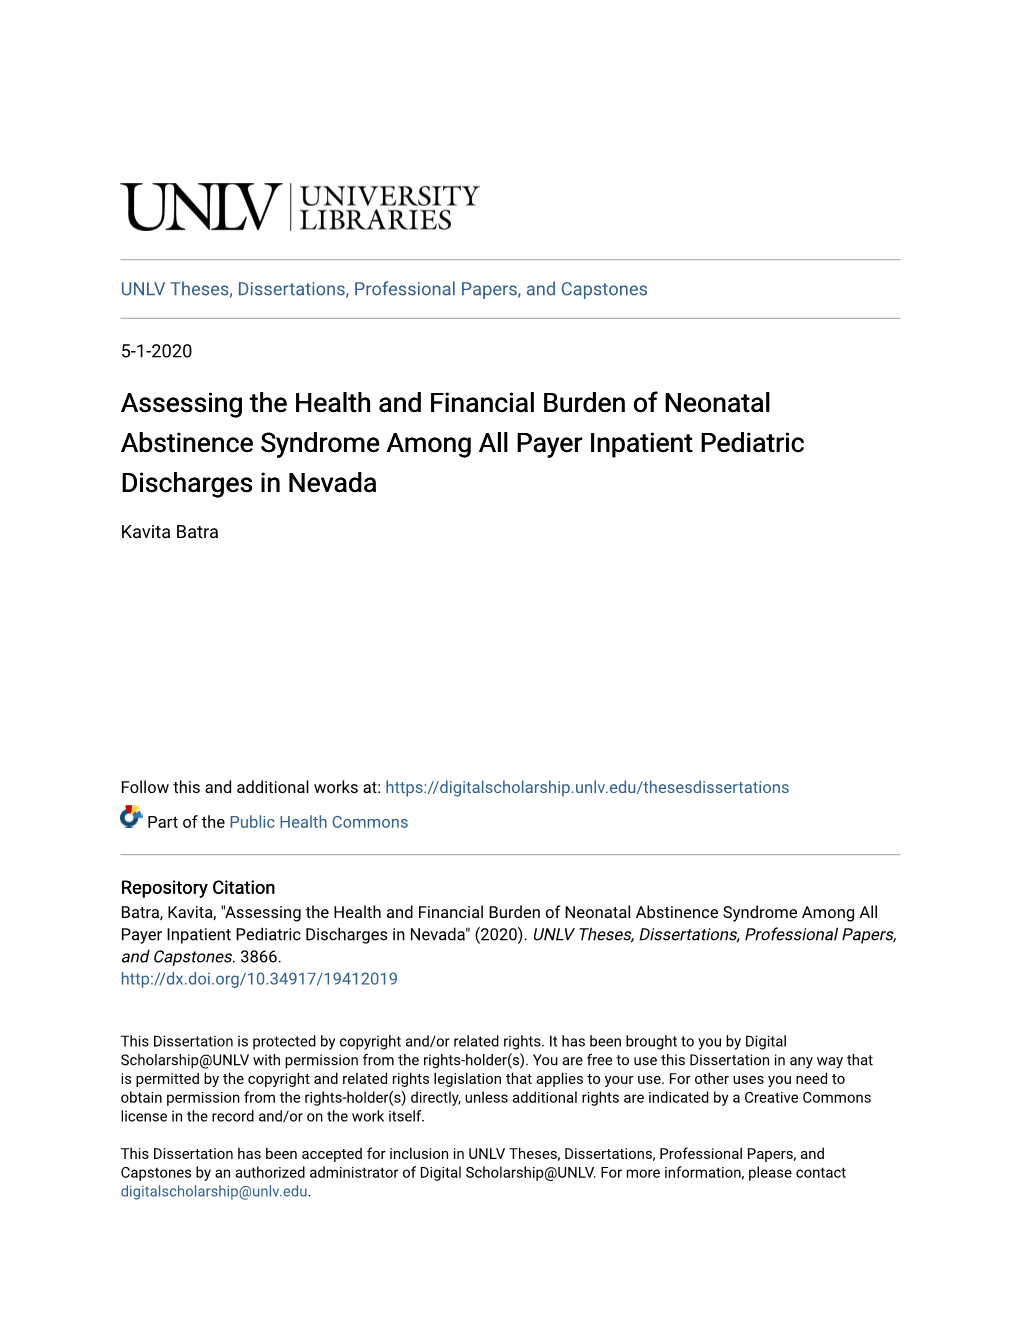 Assessing the Health and Financial Burden of Neonatal Abstinence Syndrome Among All Payer Inpatient Pediatric Discharges in Nevada